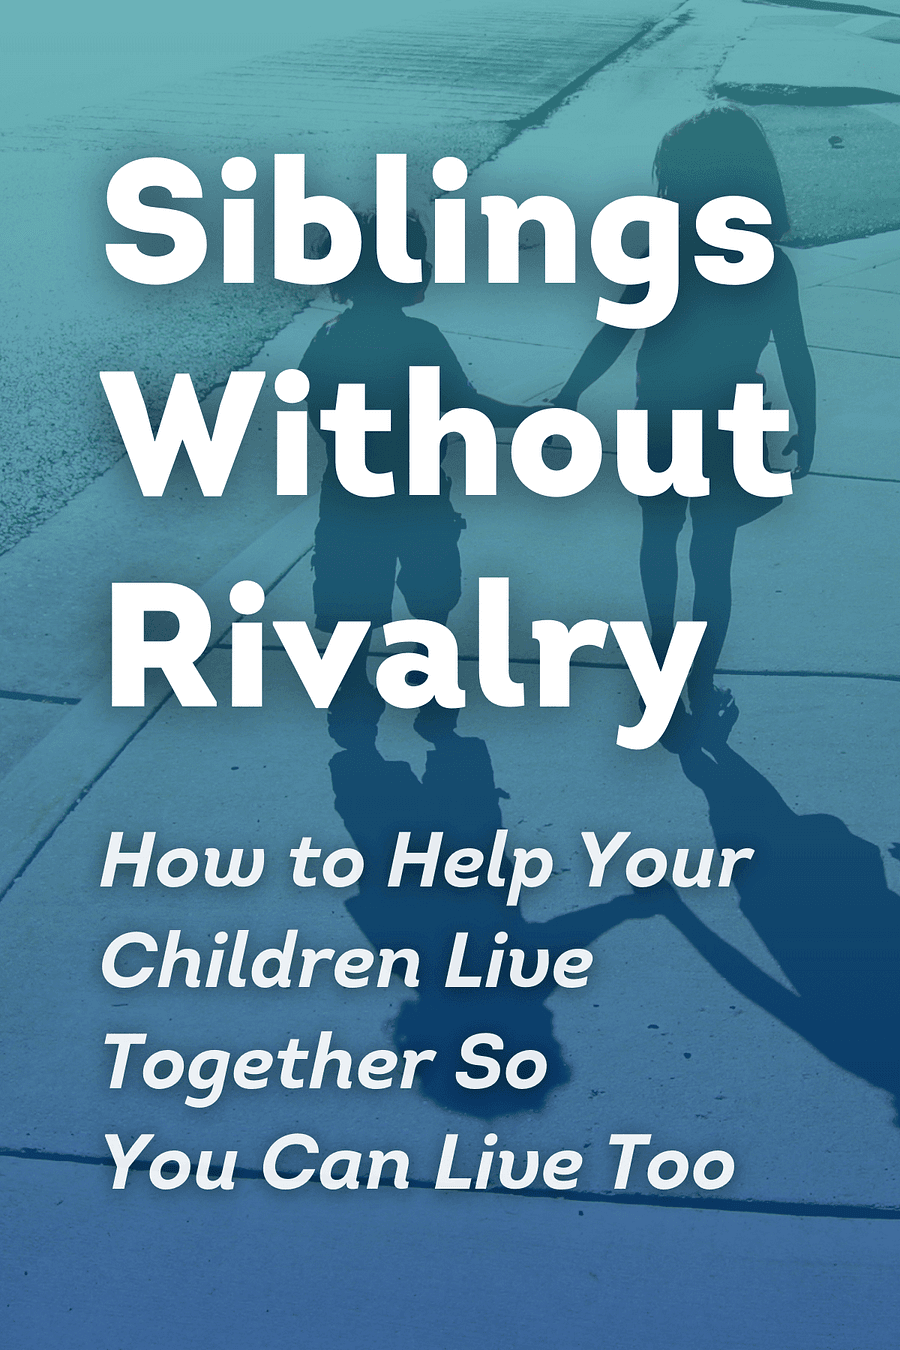 Siblings Without Rivalry by Adele Faber, Elaine Mazlish - Book Summary